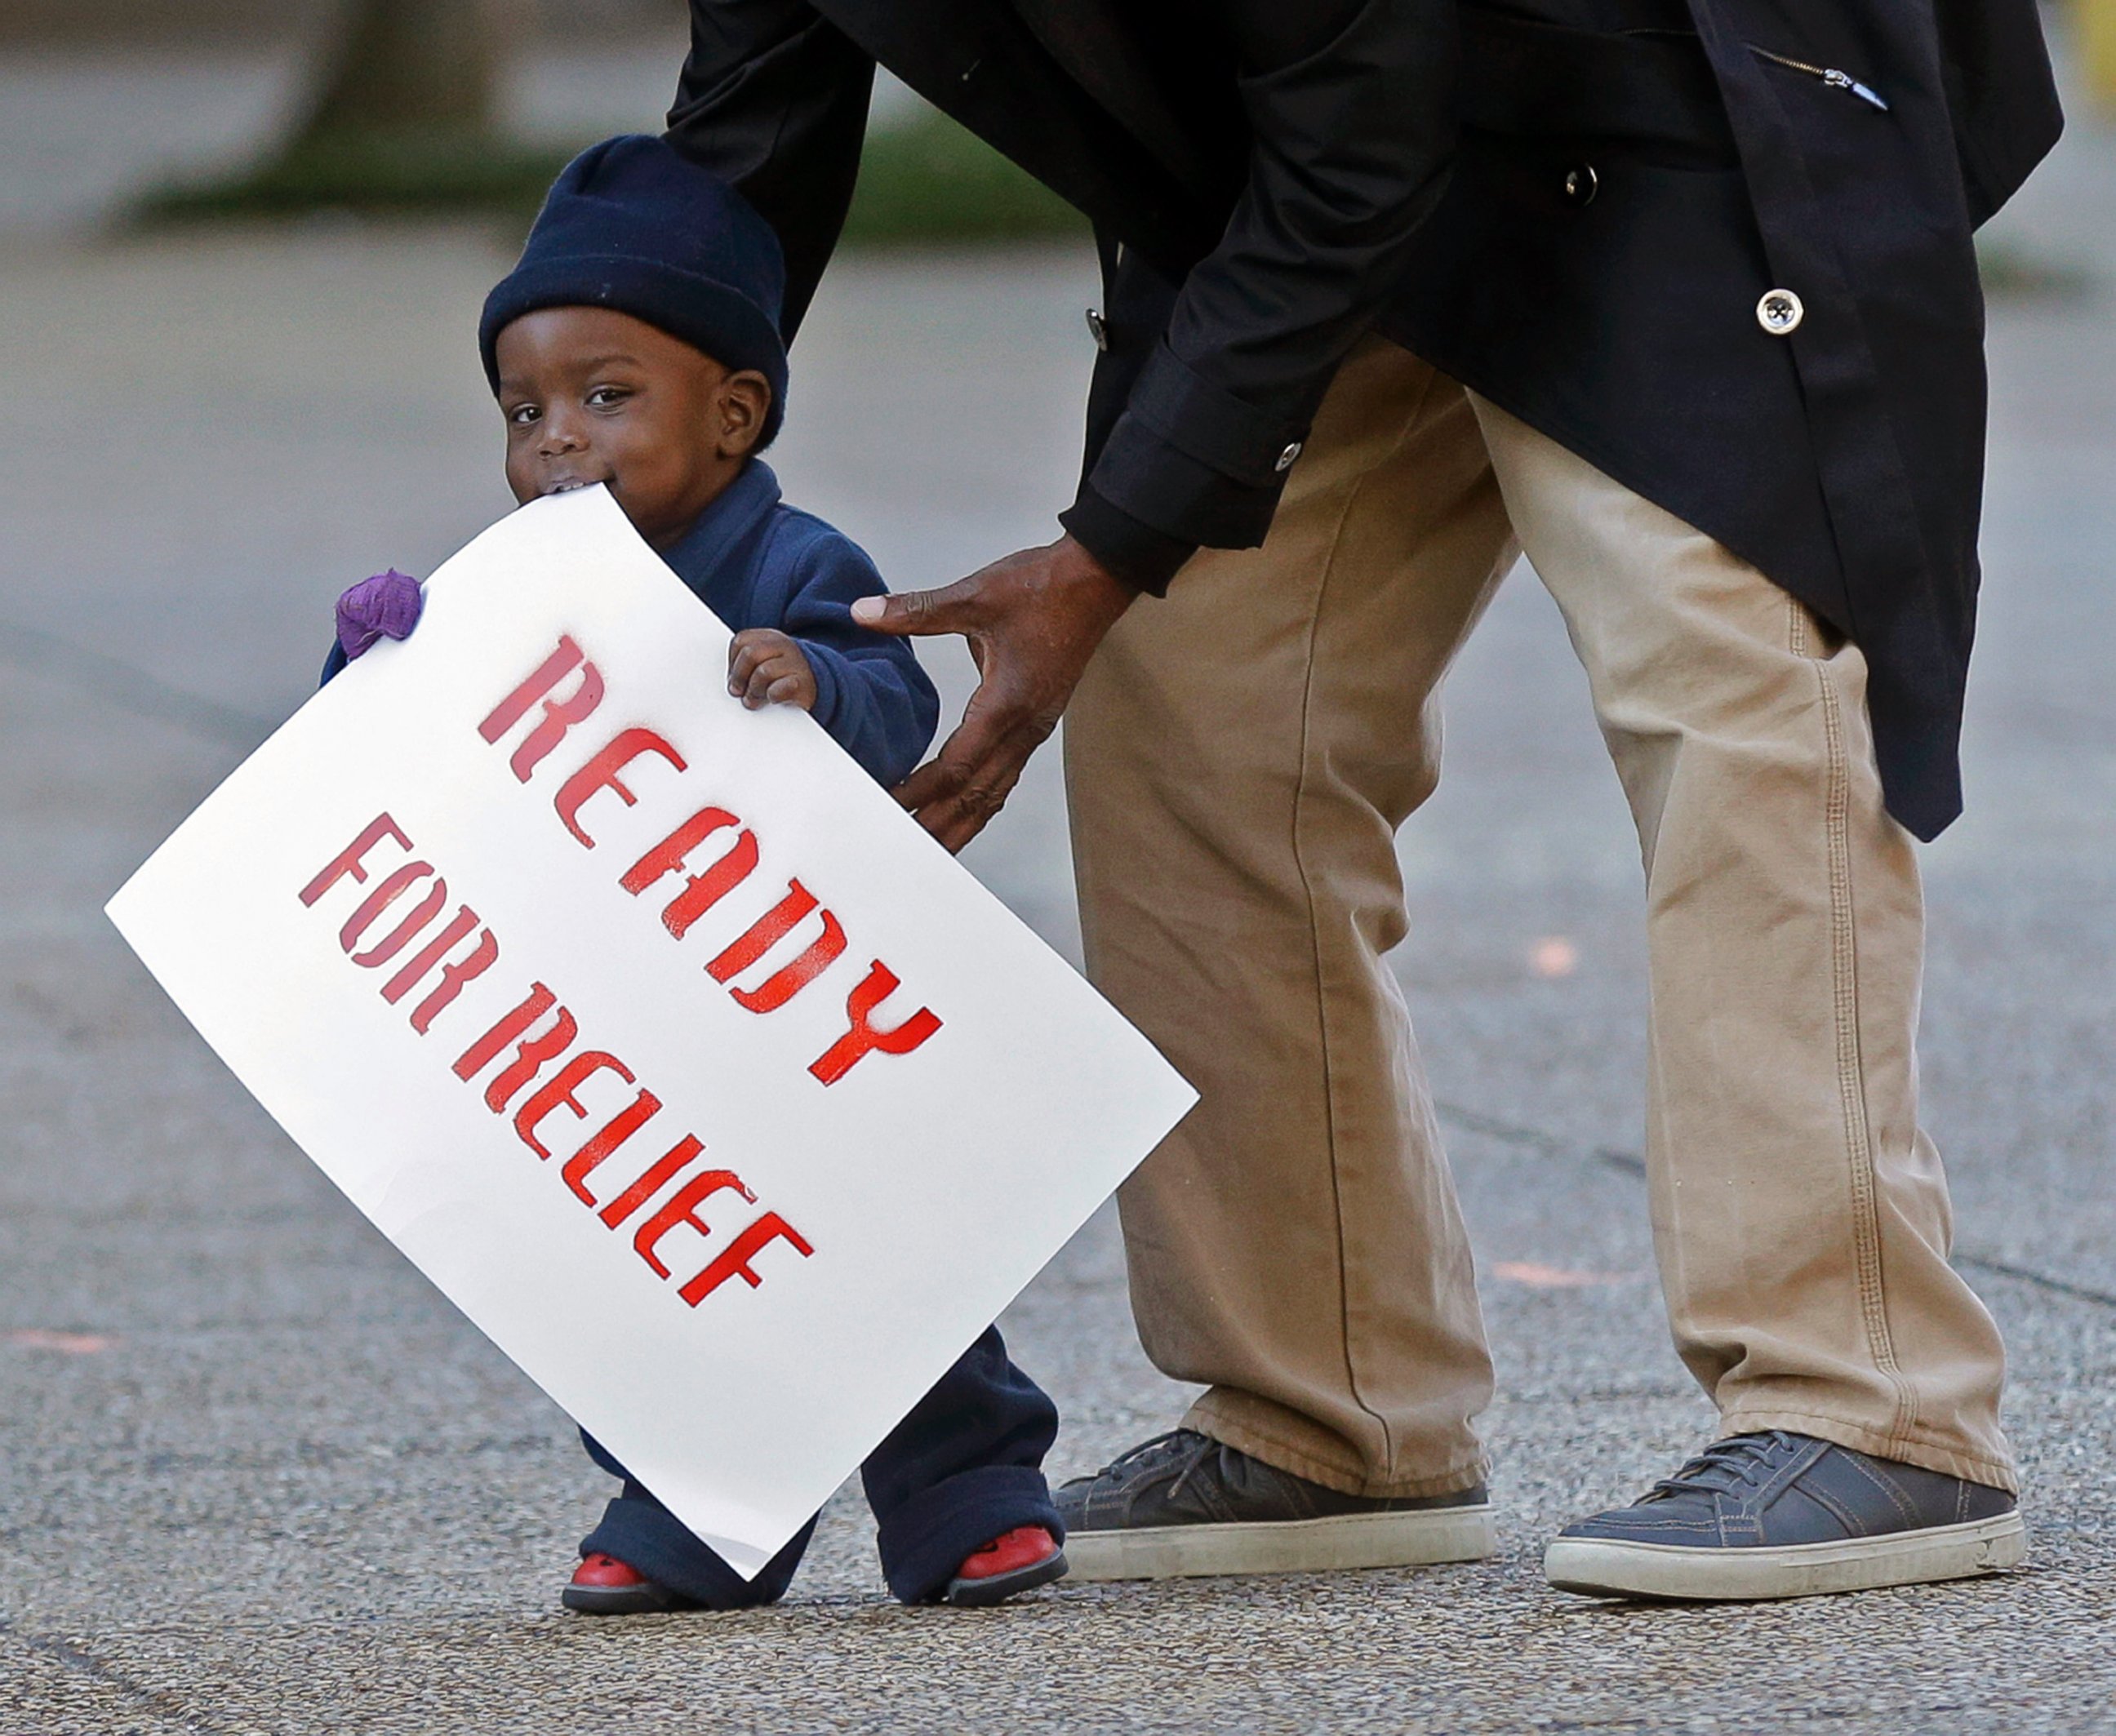 PHOTO: Lavon Massey, 1, holds a sign as immigrants and activists hold a protest outside the U.S. Citizenship & Immigration Service office in New Orleans, Nov. 19, 2014.